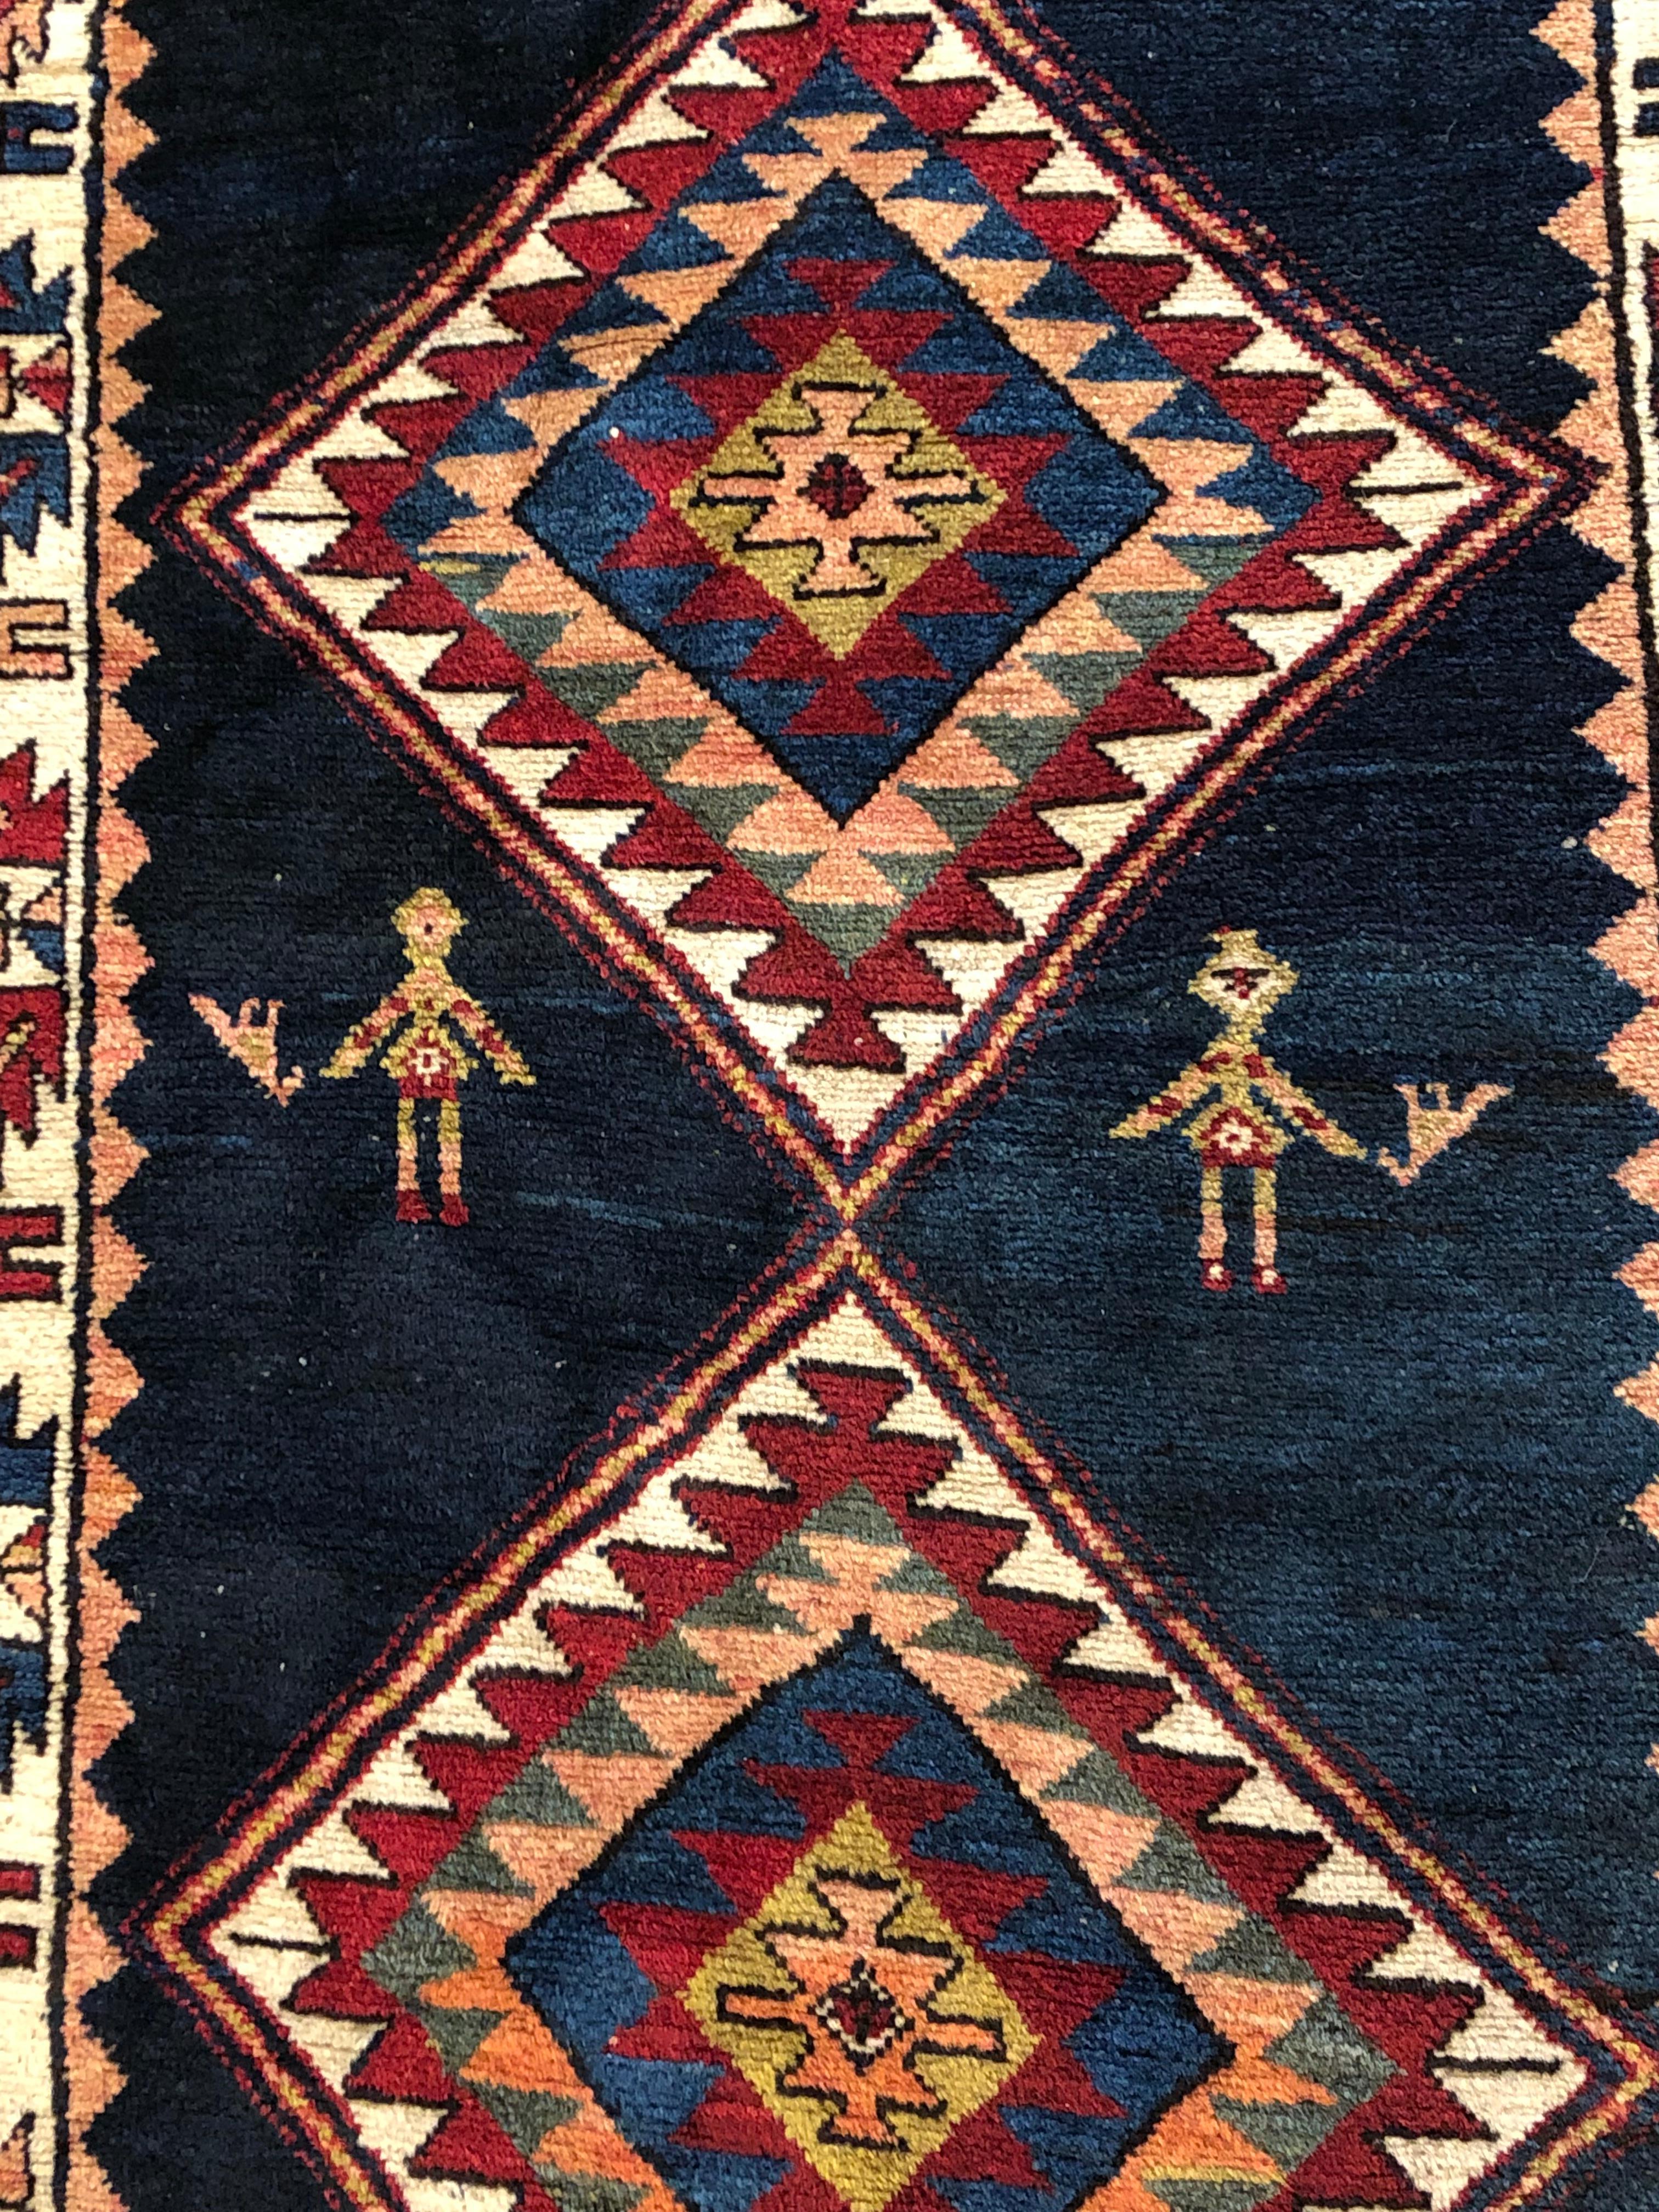 The Kazak carpet belongs to the large family of Caucasian rugs. The populations of this area learned the knotting by the Seljuk invaders in the 11th century. But benefited from the artistic influences of each of the cultures that passed through